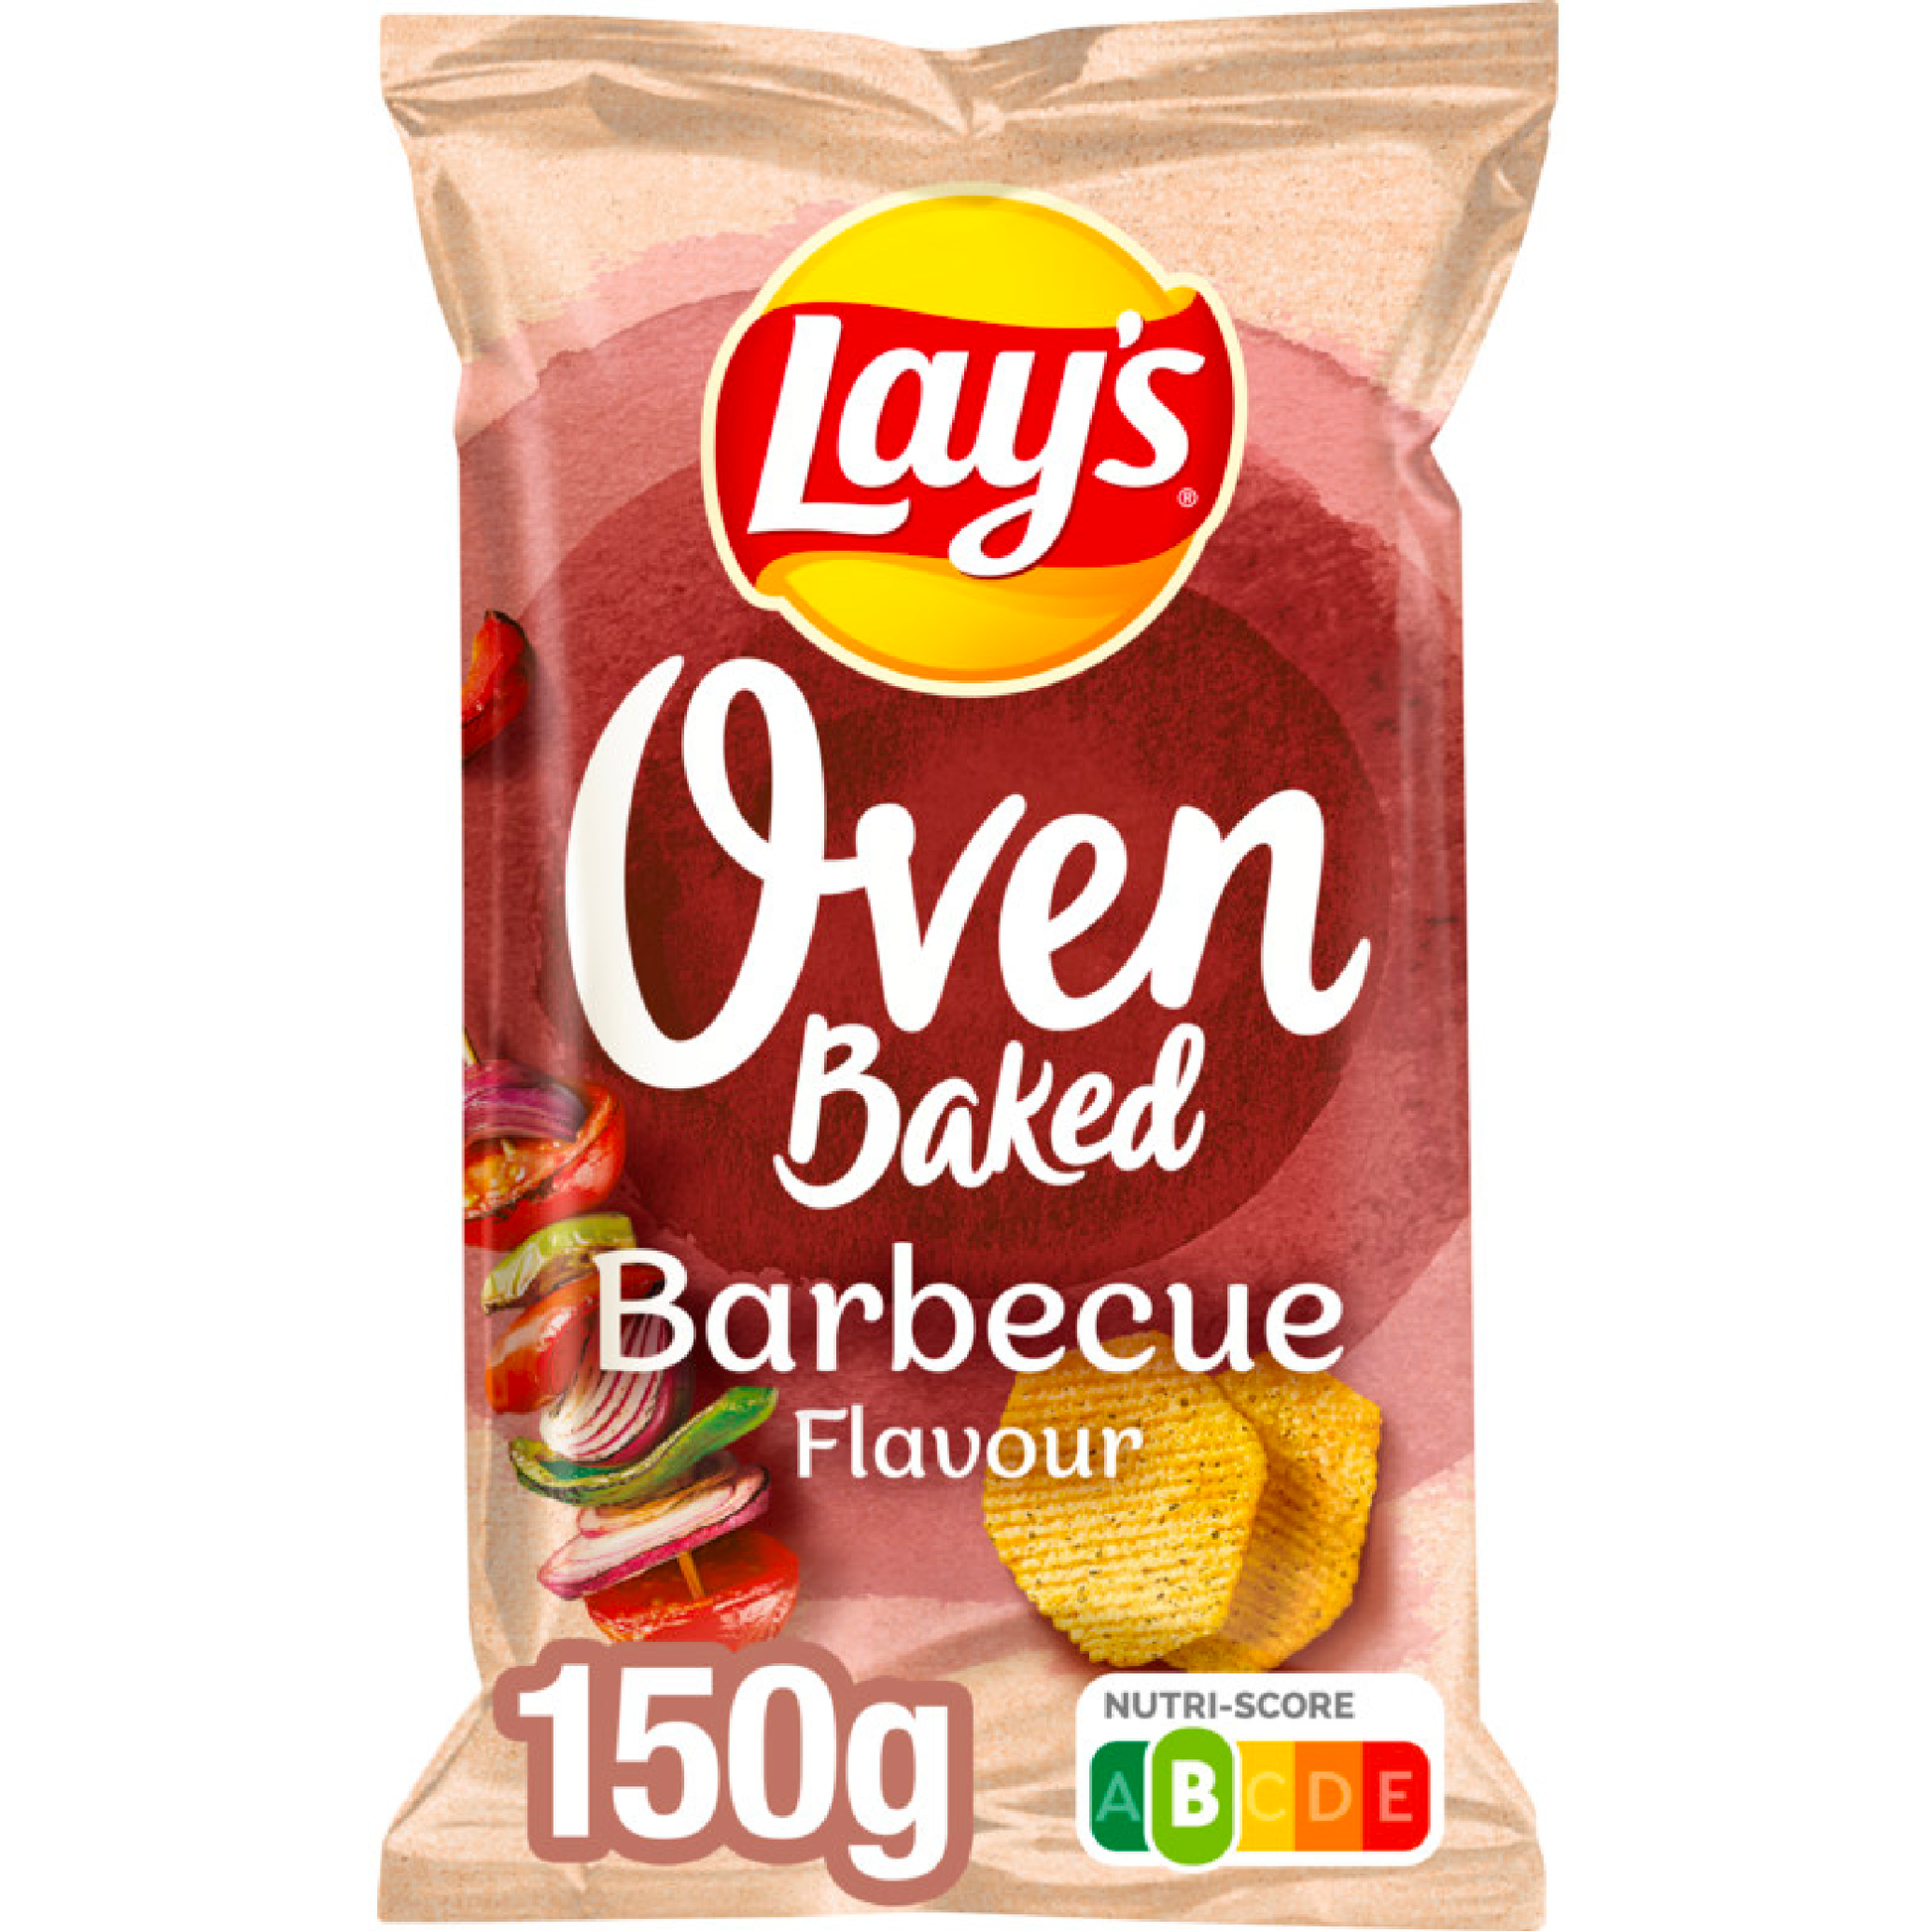 Lay's Oven Baked Barbecue 150g - Snack-It